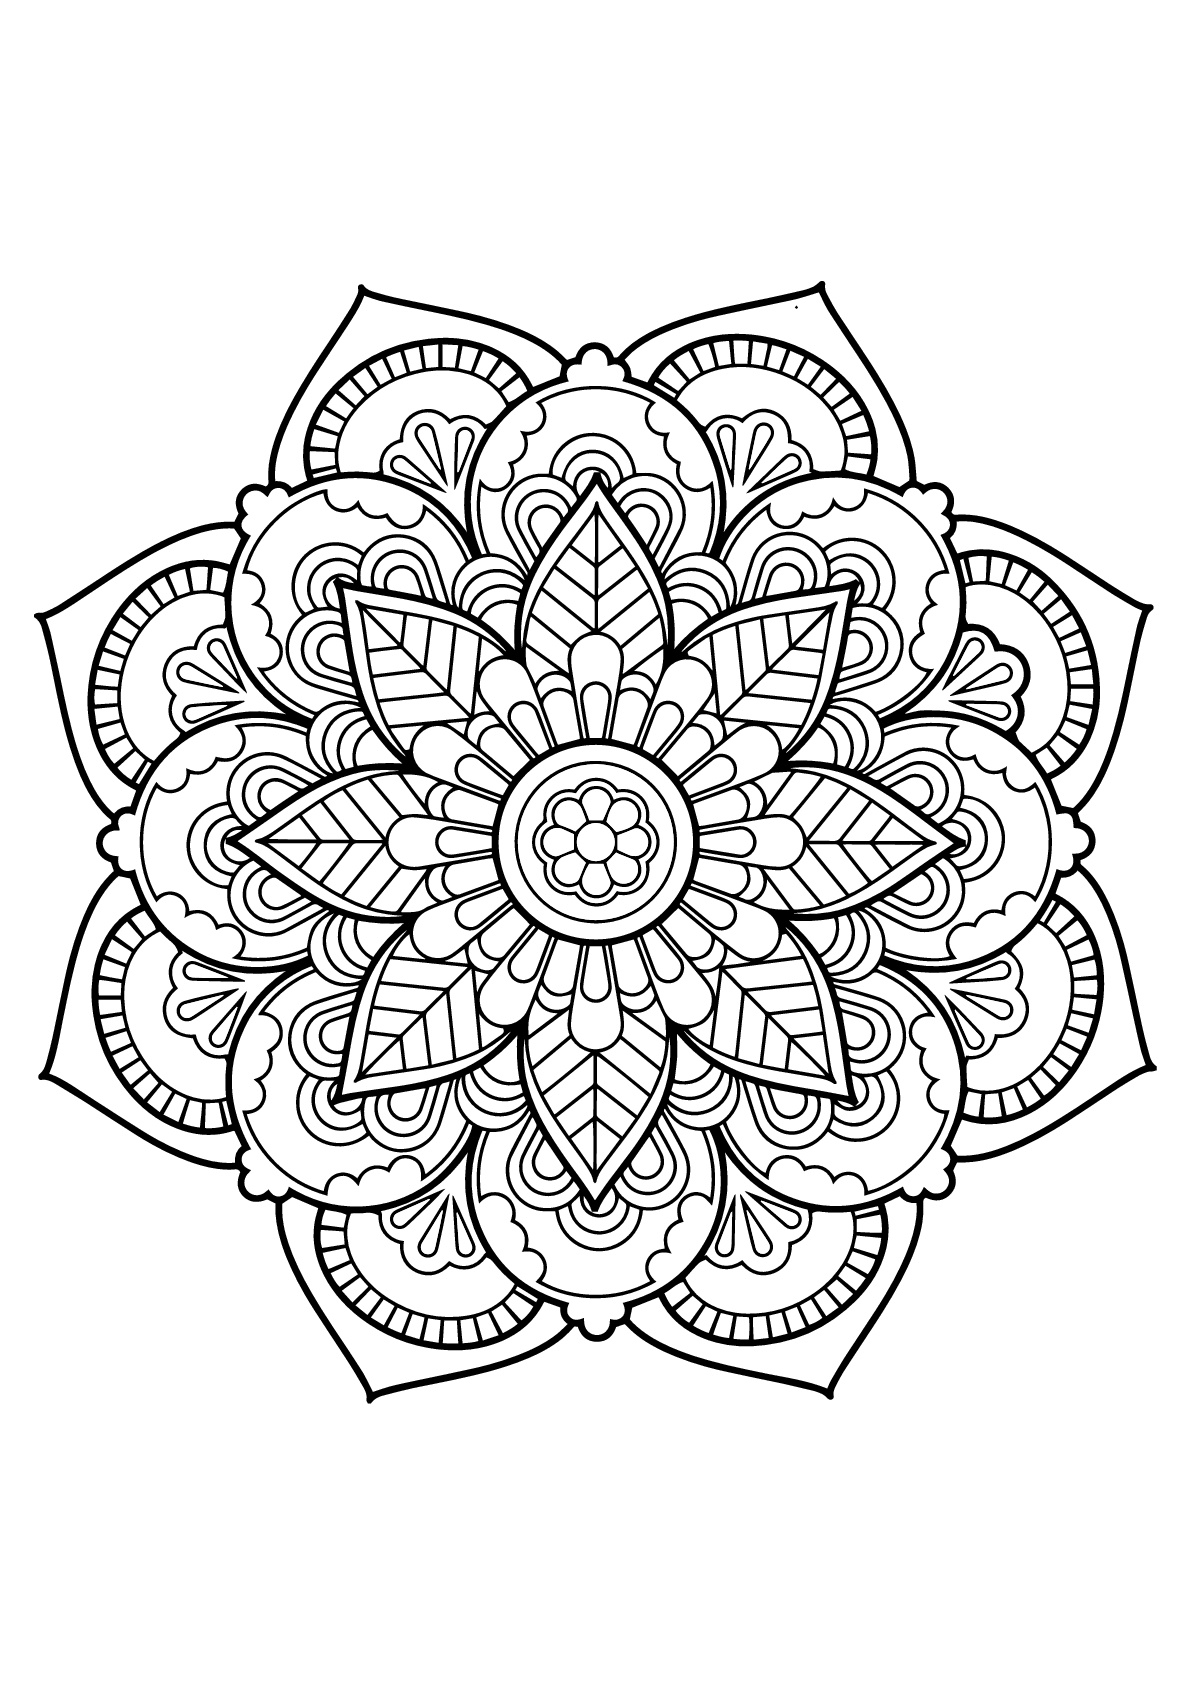 Download Mandala from free coloring books for adults 22 - M&alas ...